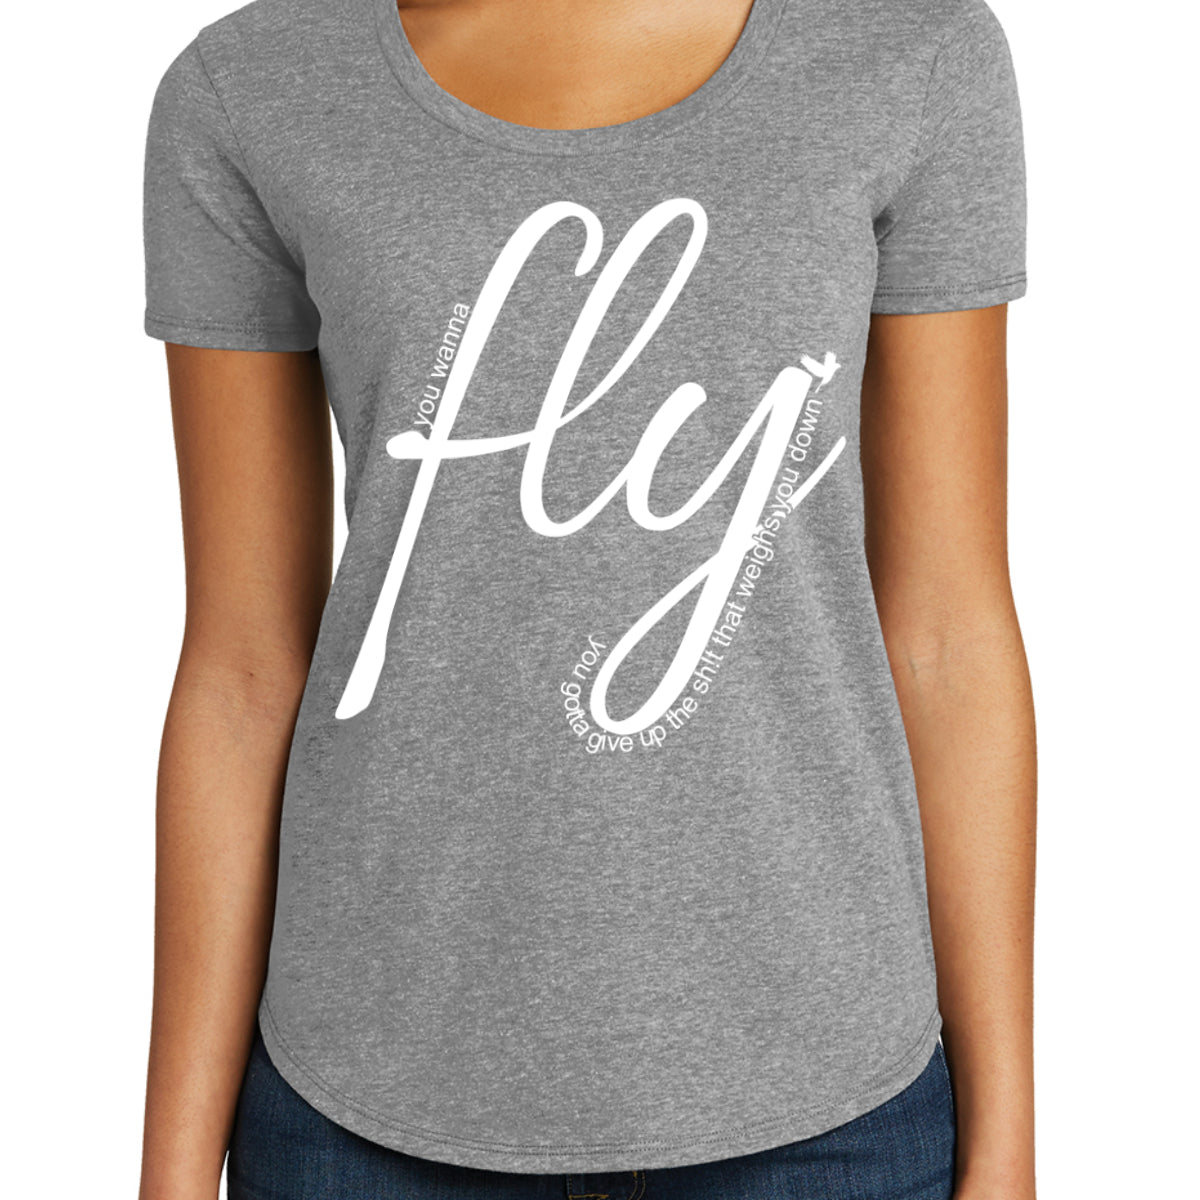 Fly - Women's Scoop Neck Fitted T-shirts